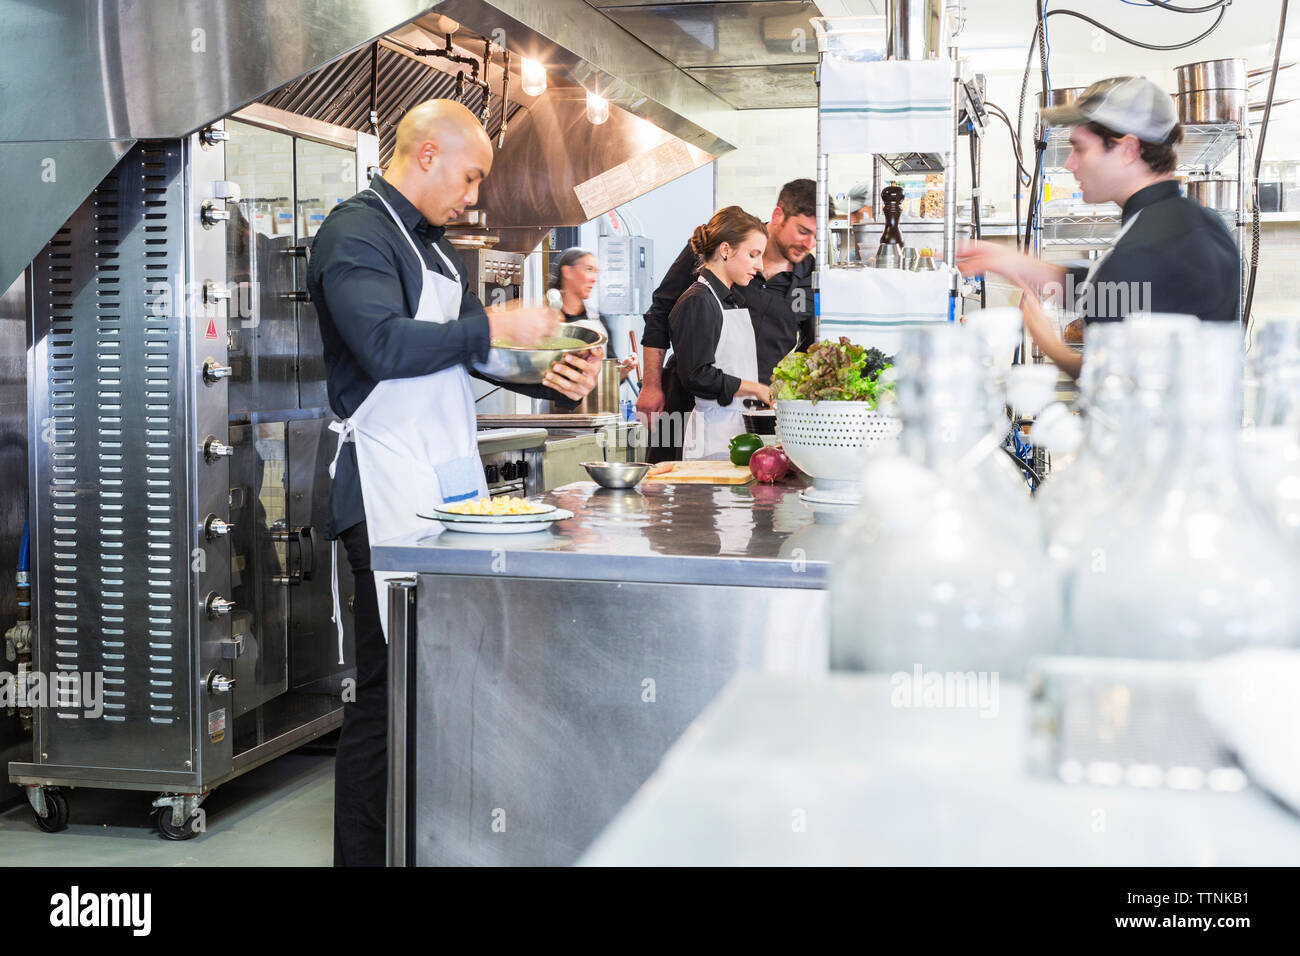 Chefs preparing food in commercial kitchen at restaurant Stock Photo